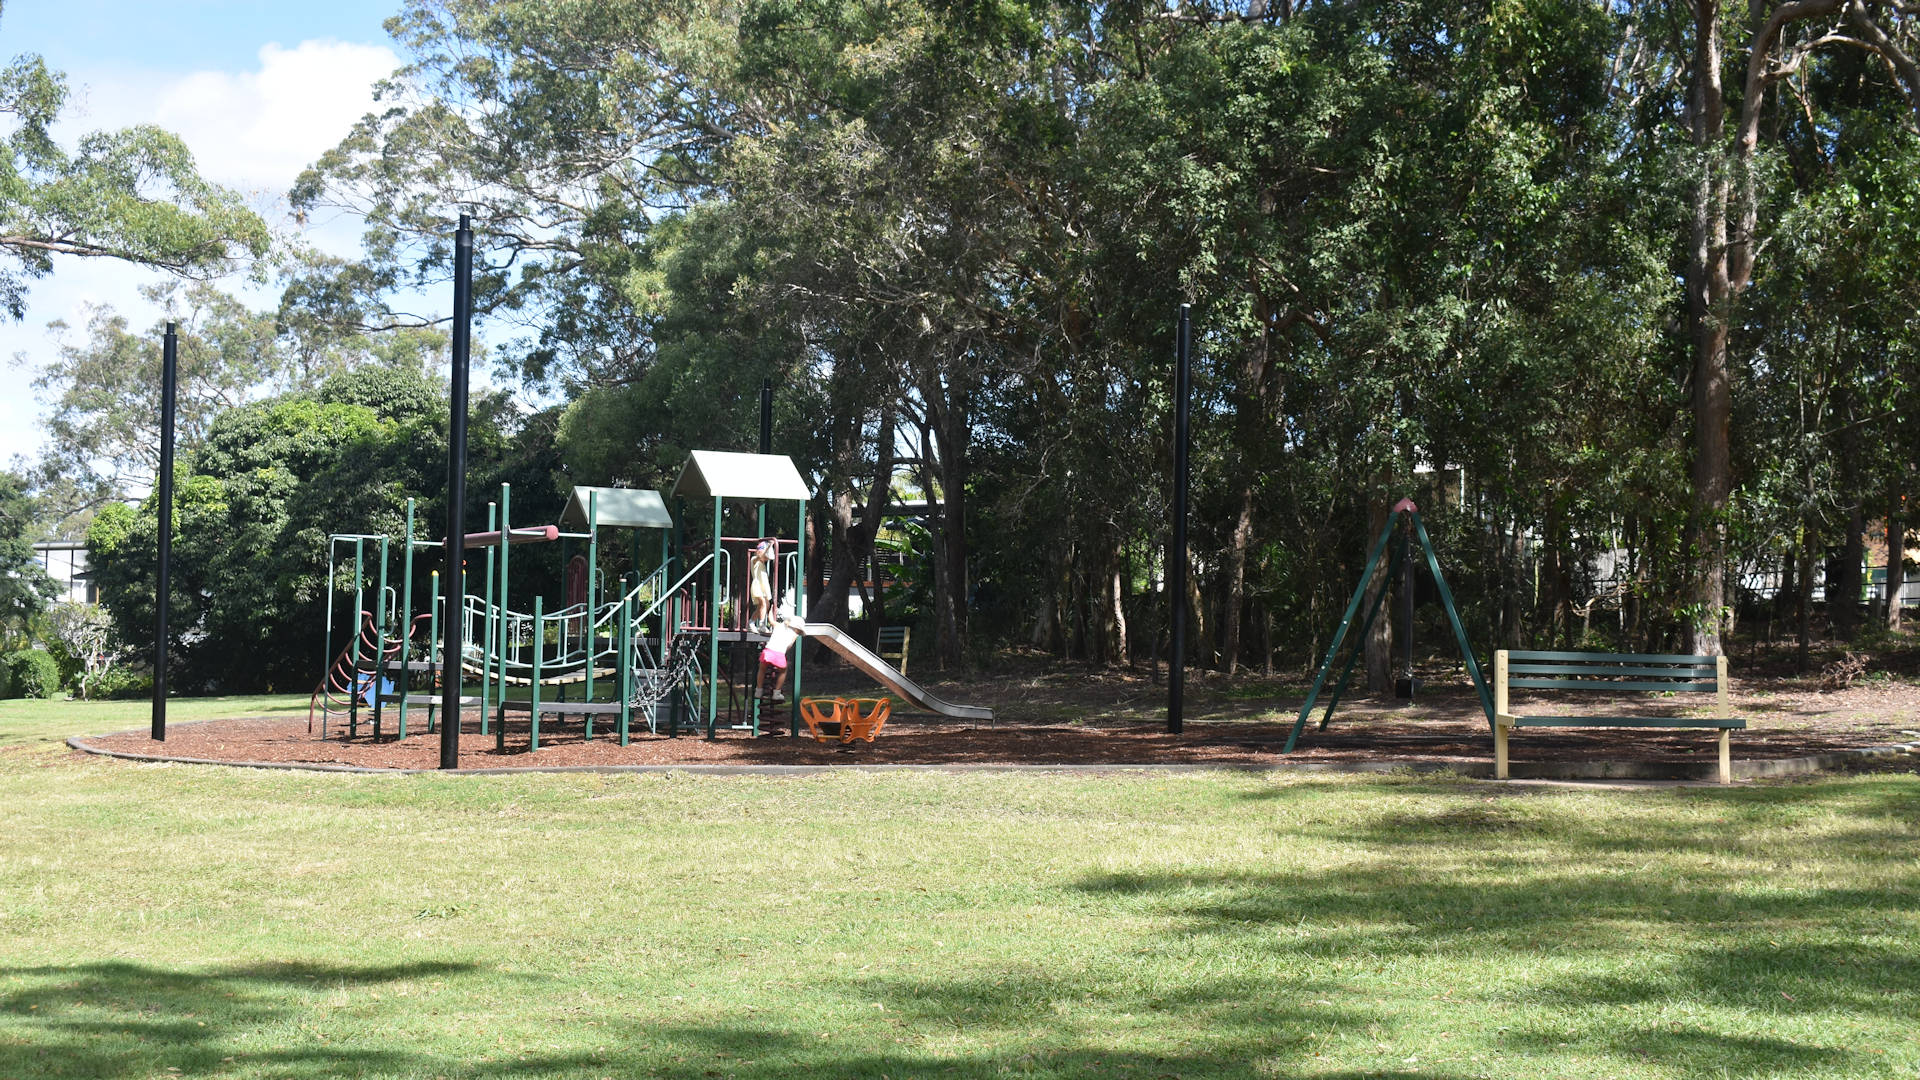 Playground in an open grass area with trees in the background, taken at Melaleuca Environmental Park near Manly Queensland